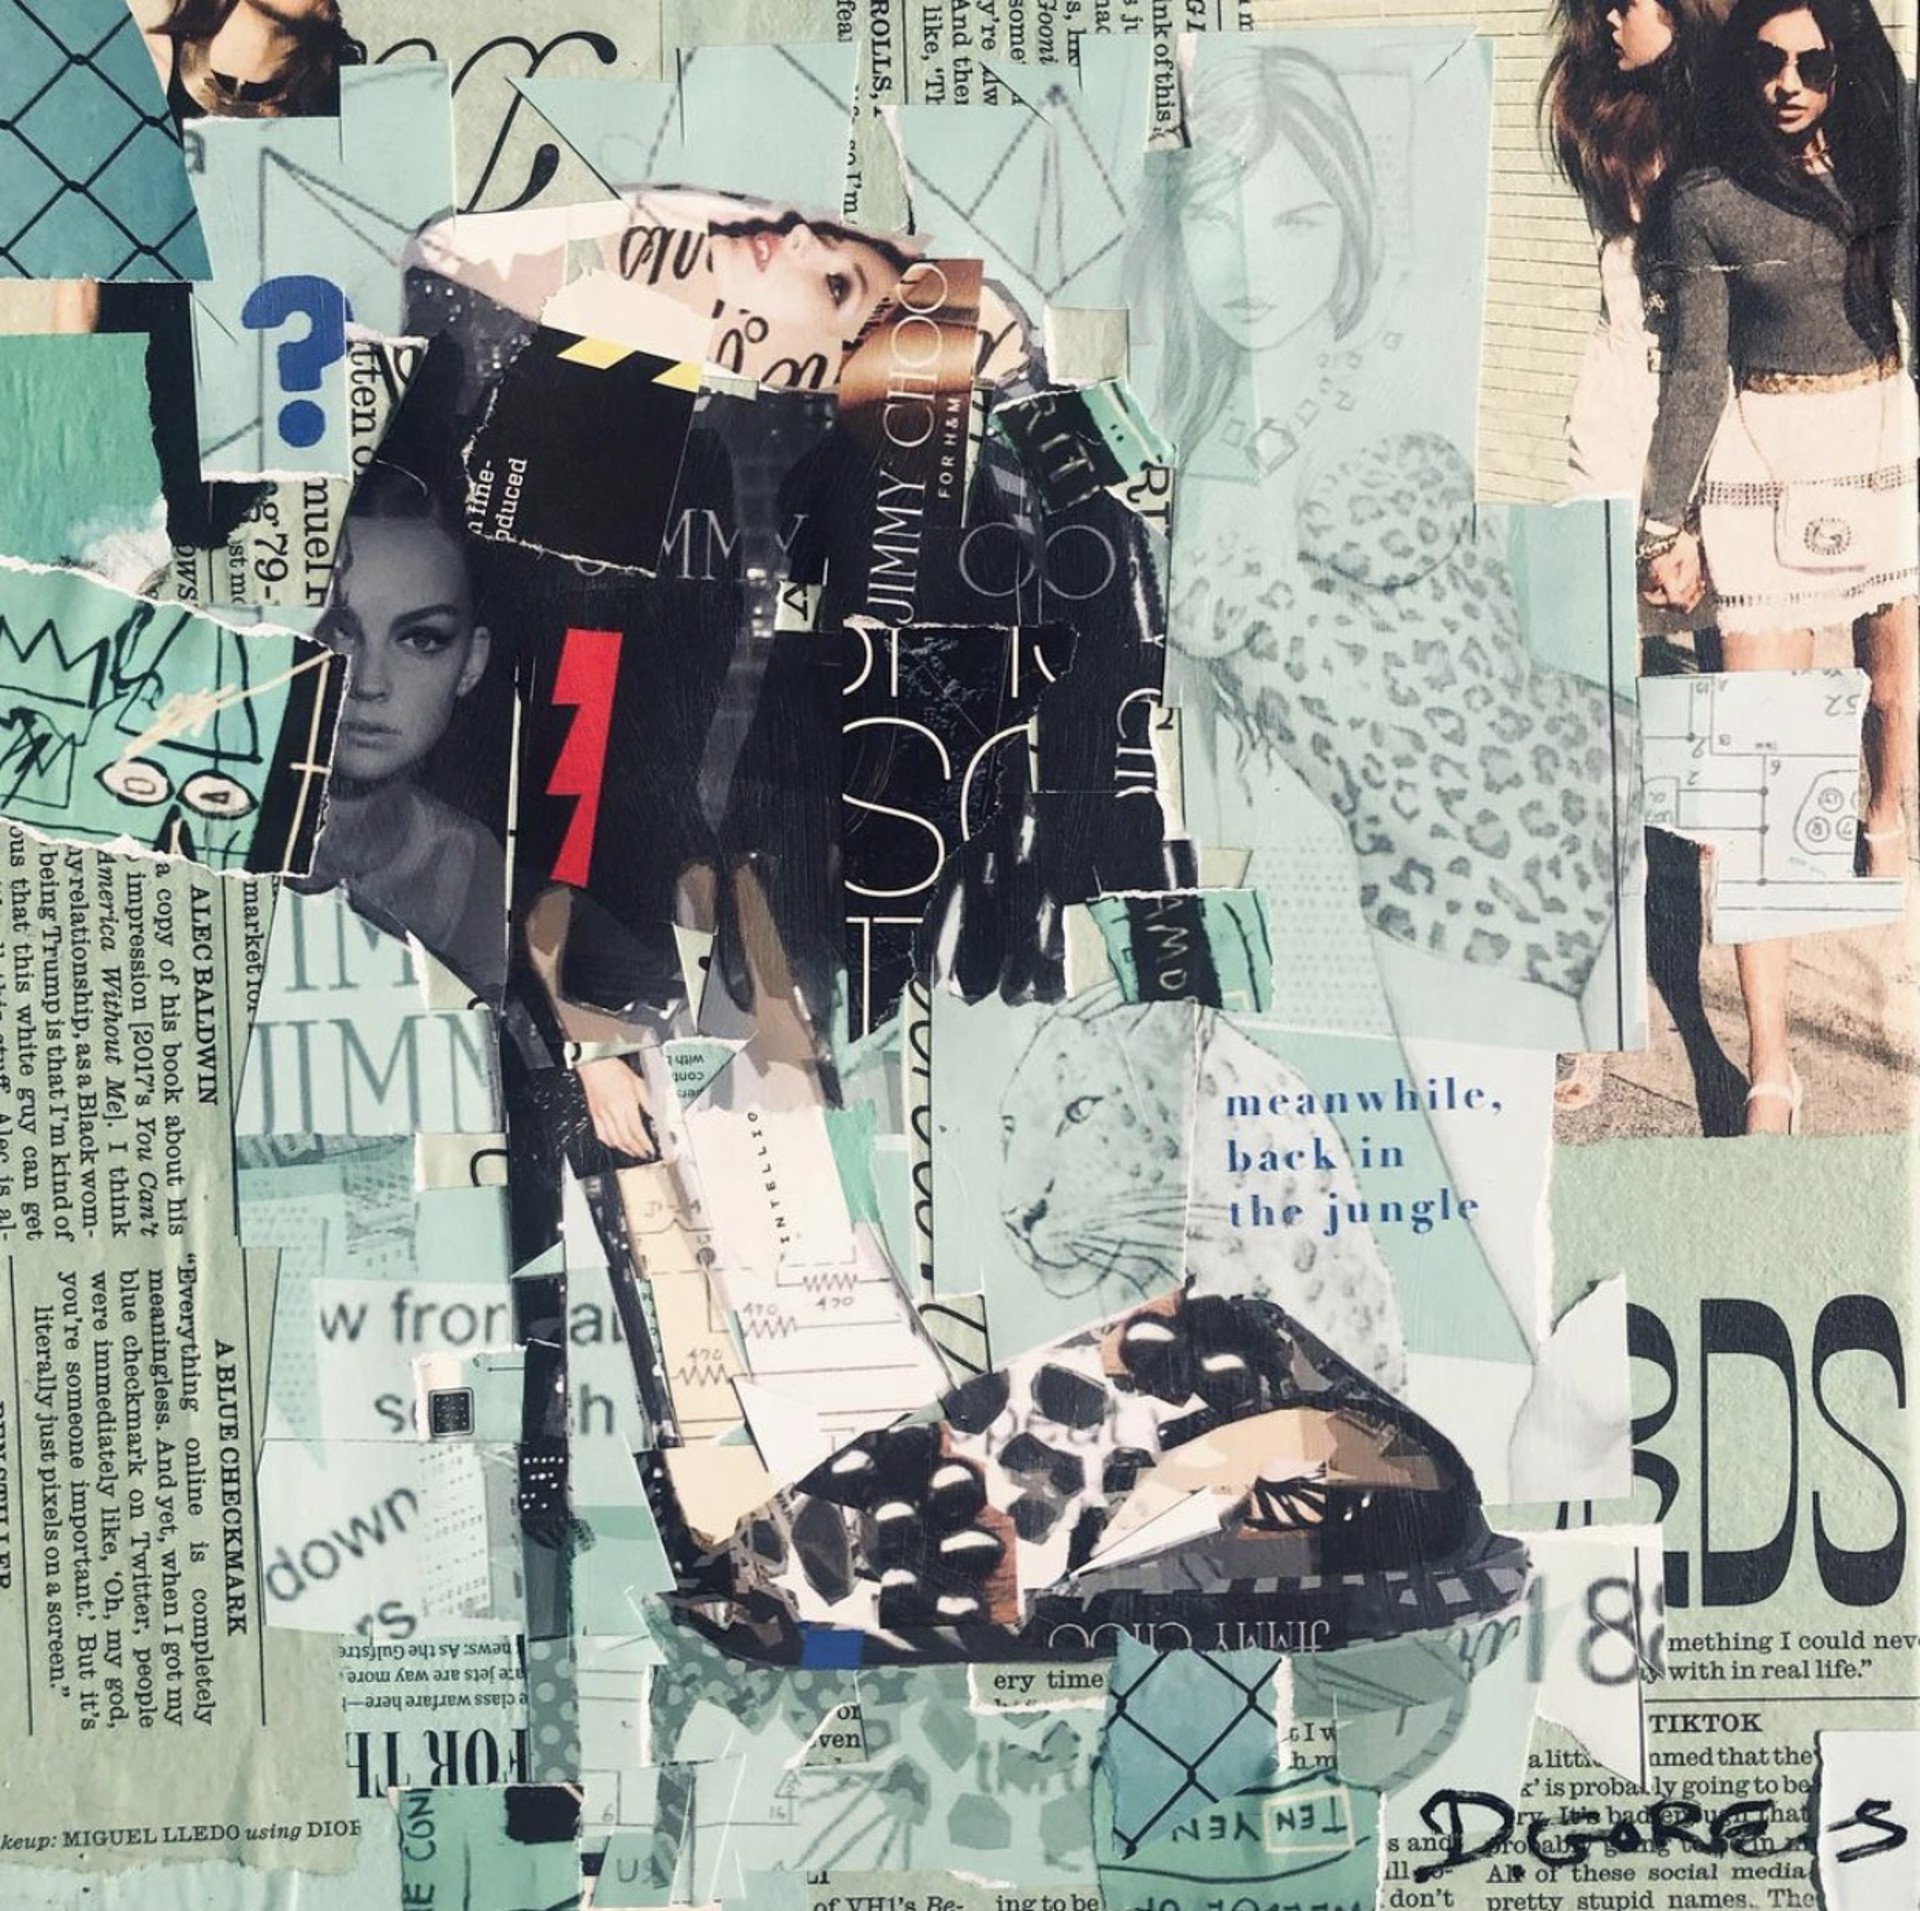 Meanwhile, Back In The Jungle by Derek Gores